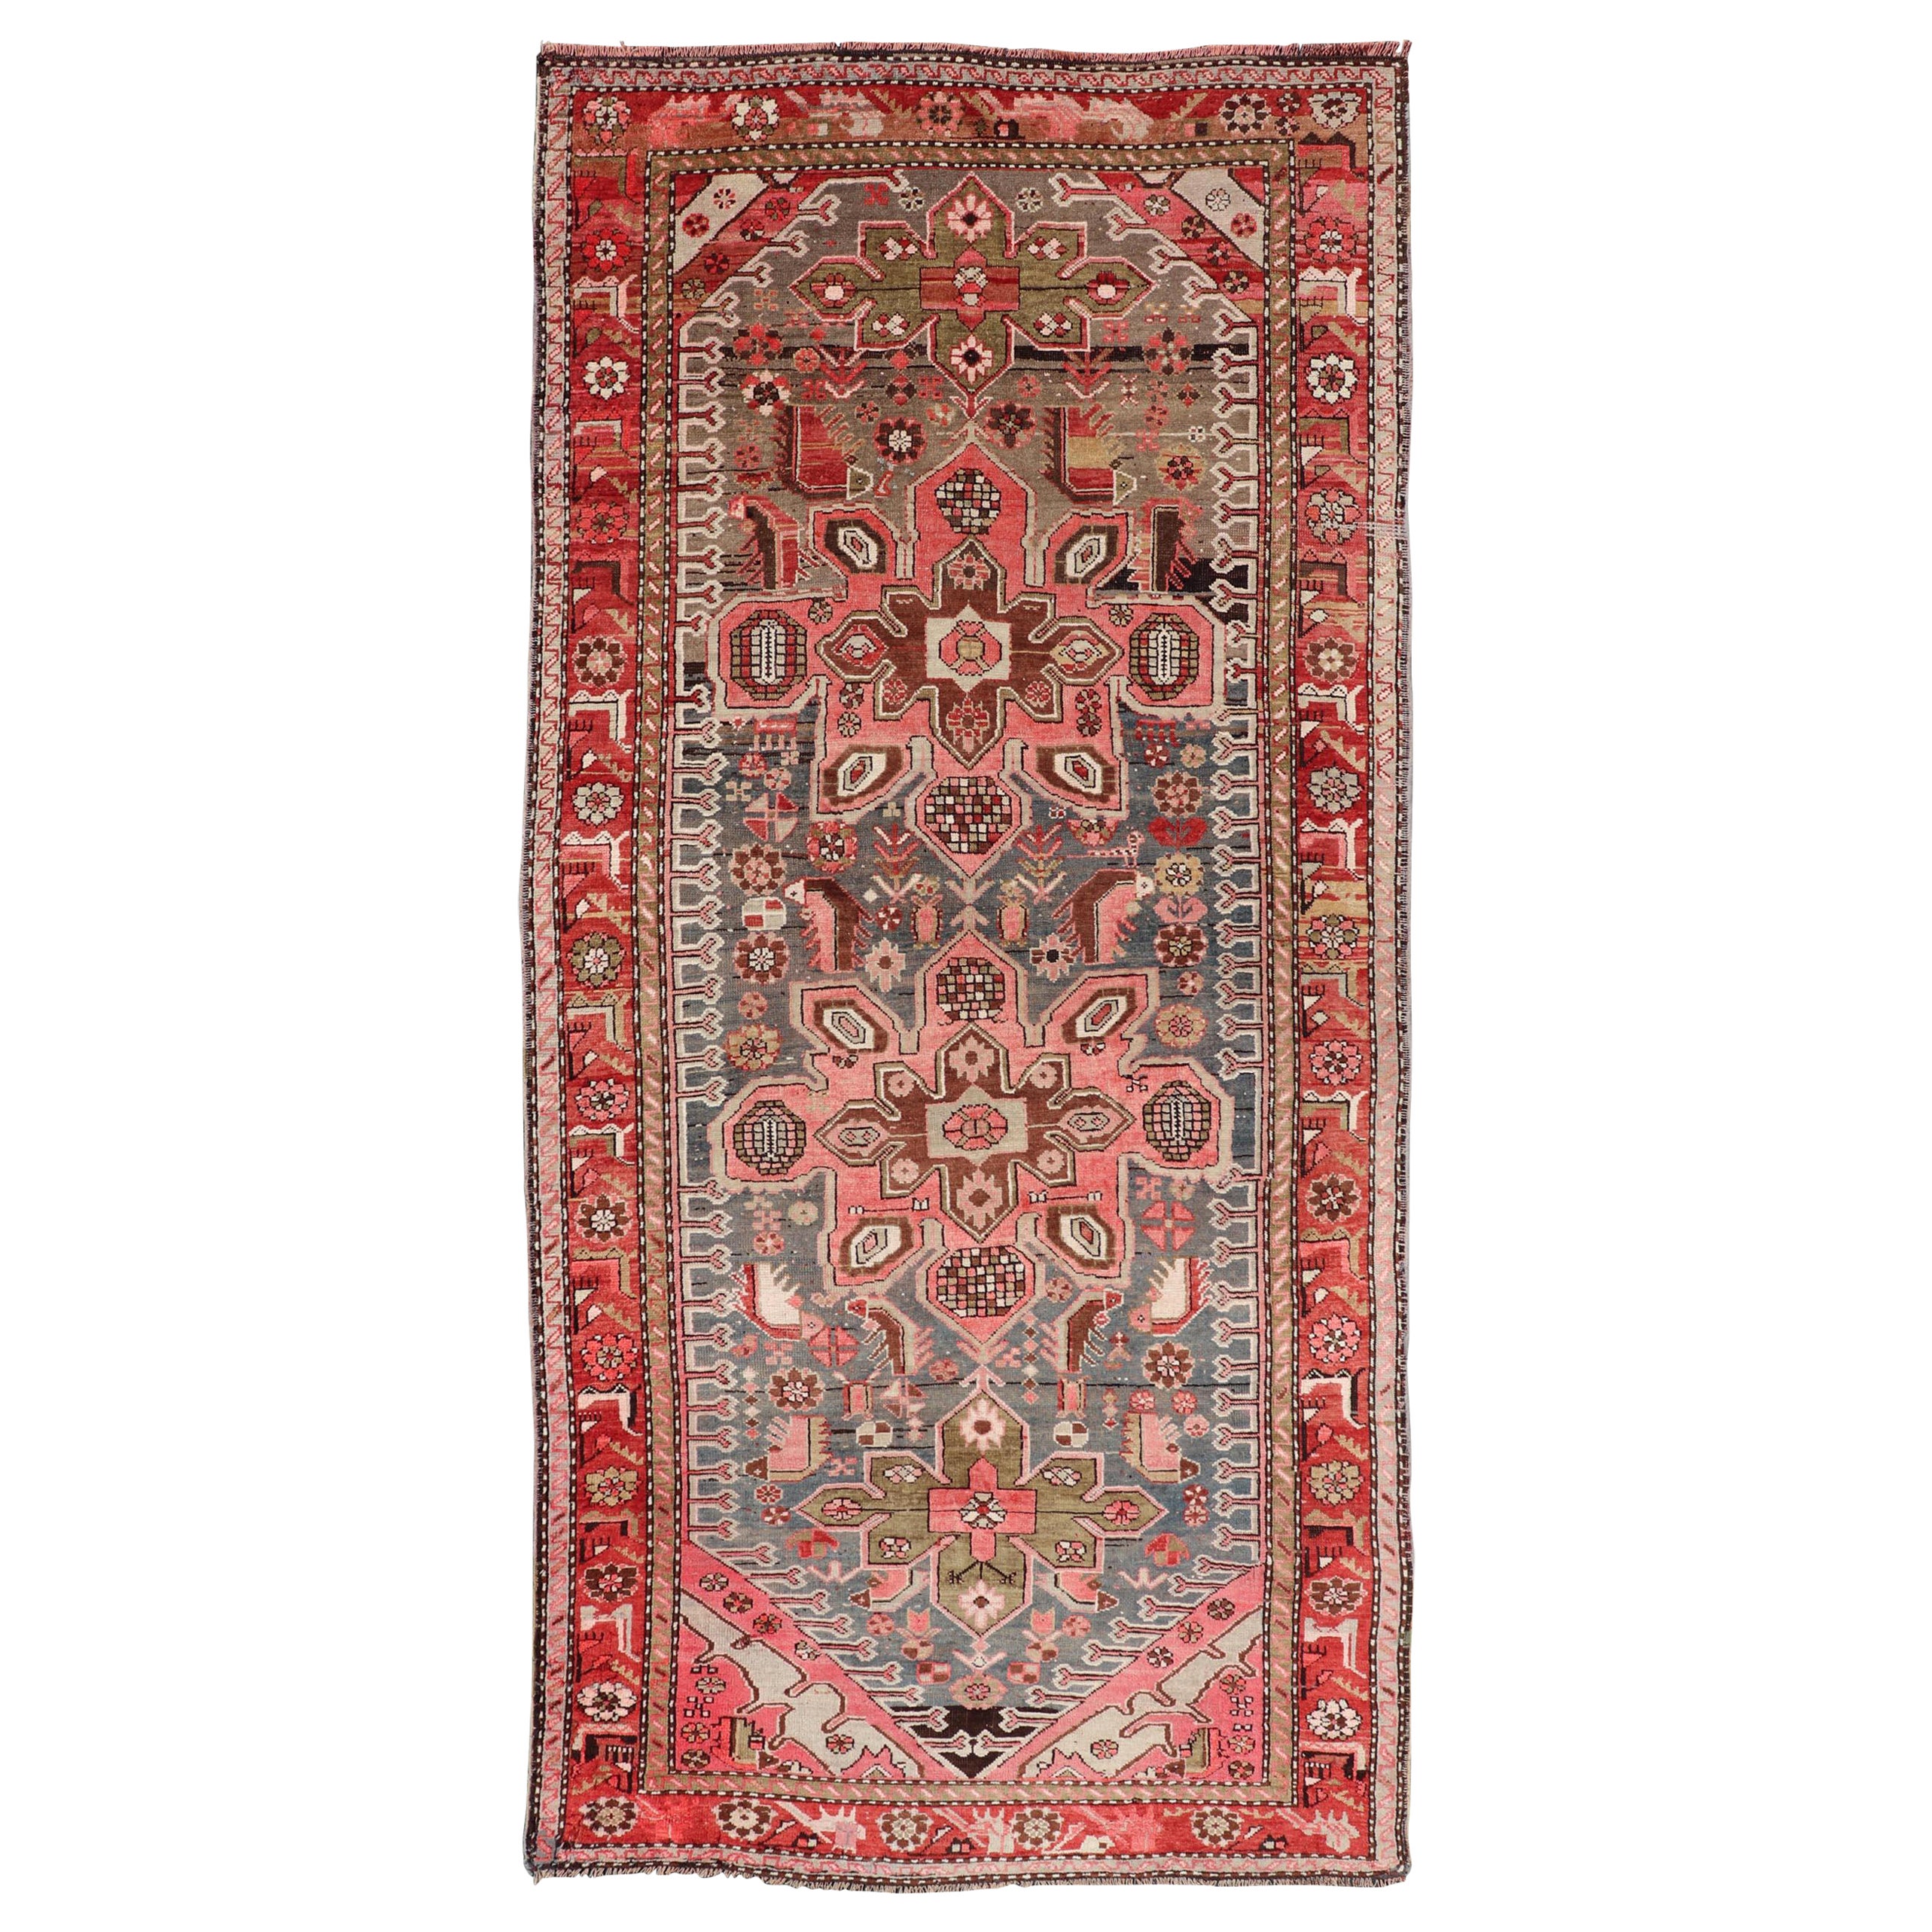 Antique Caucasian Karabagh Gallery Runner With Large Medallions Of Pink And Red